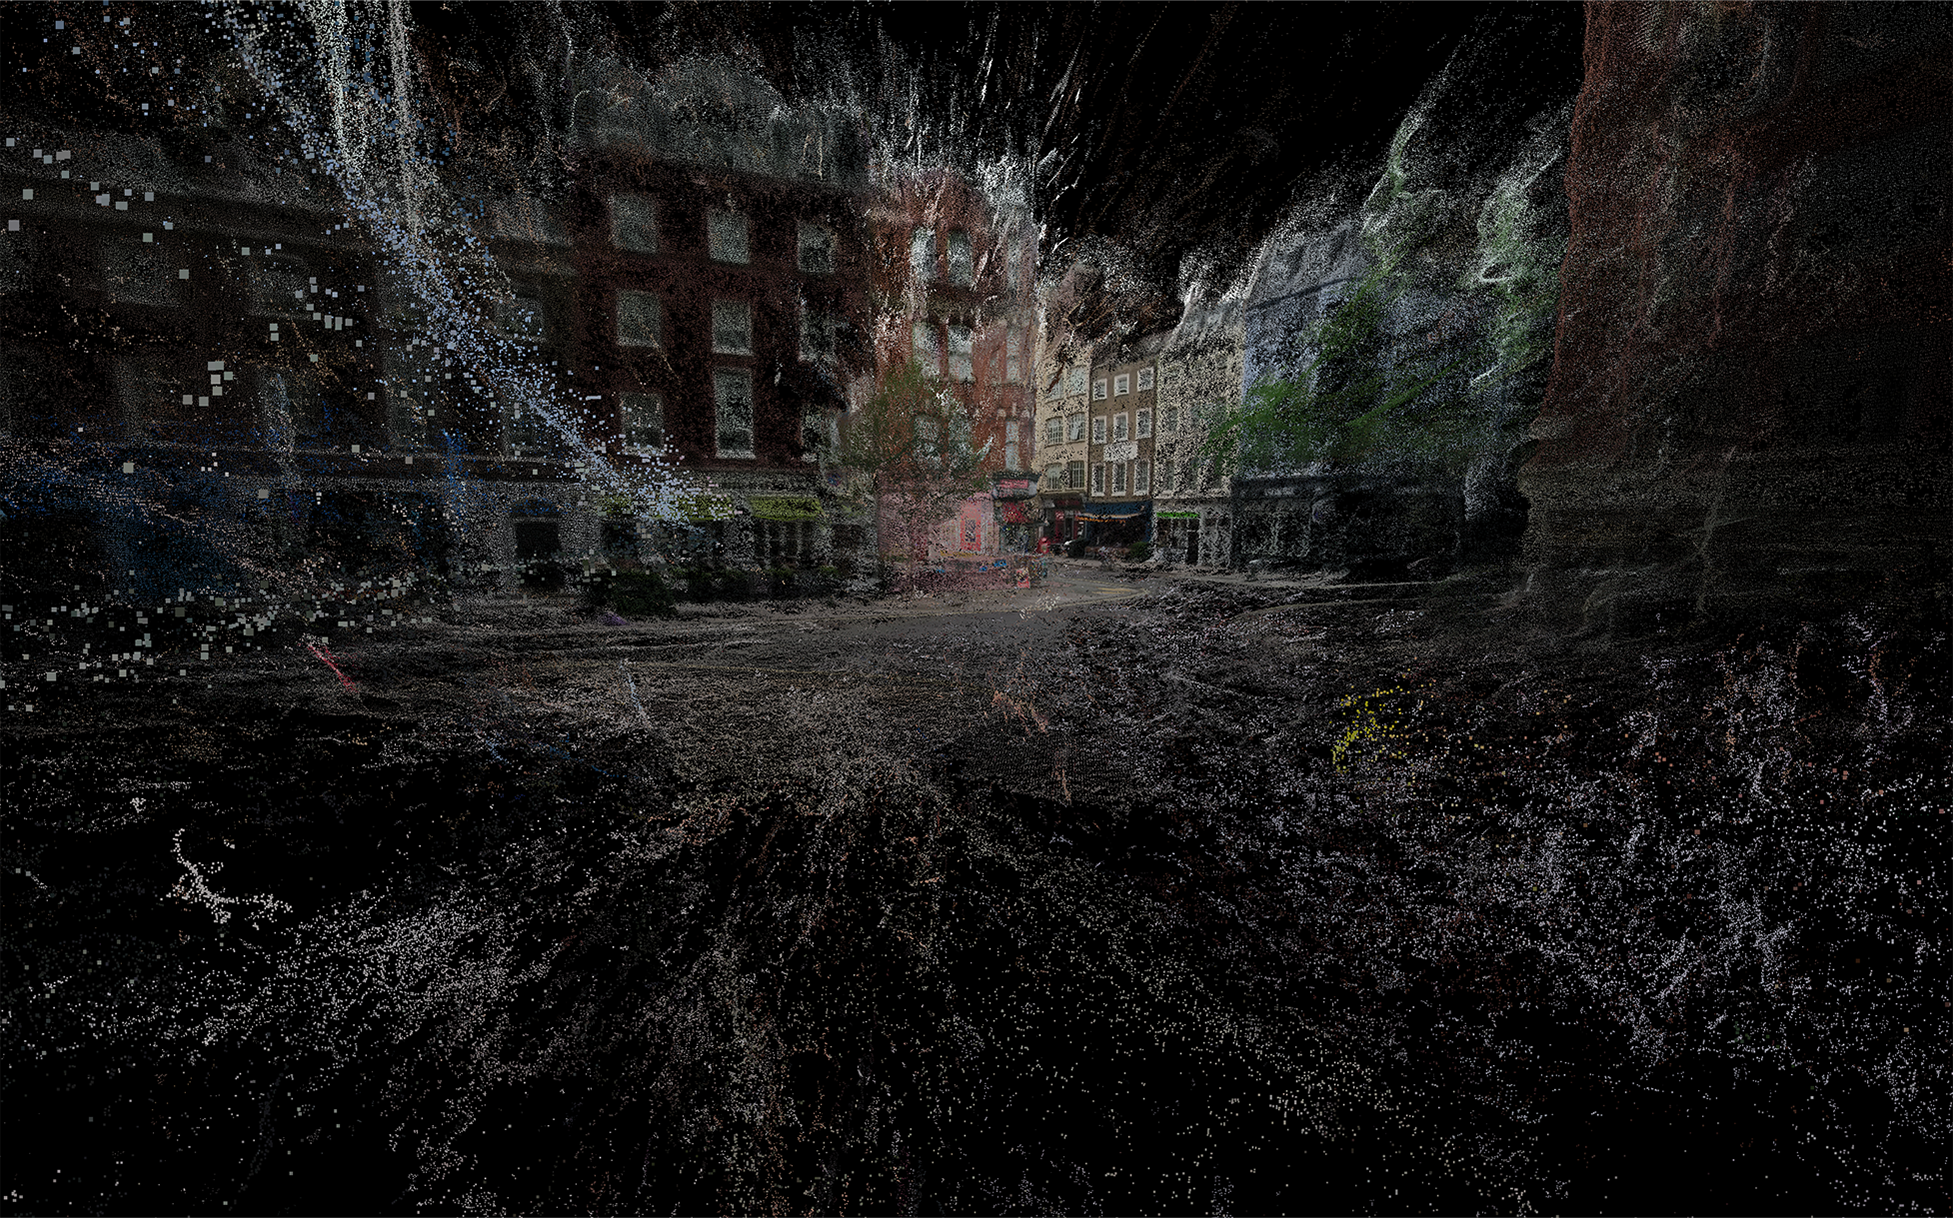 A London street view - rendered with the image formed of dust-like particles that are denser towards the centre of the image and less denser towards the edges. The street image contains a road junction and multiple shop fronts beneath red brick flats 